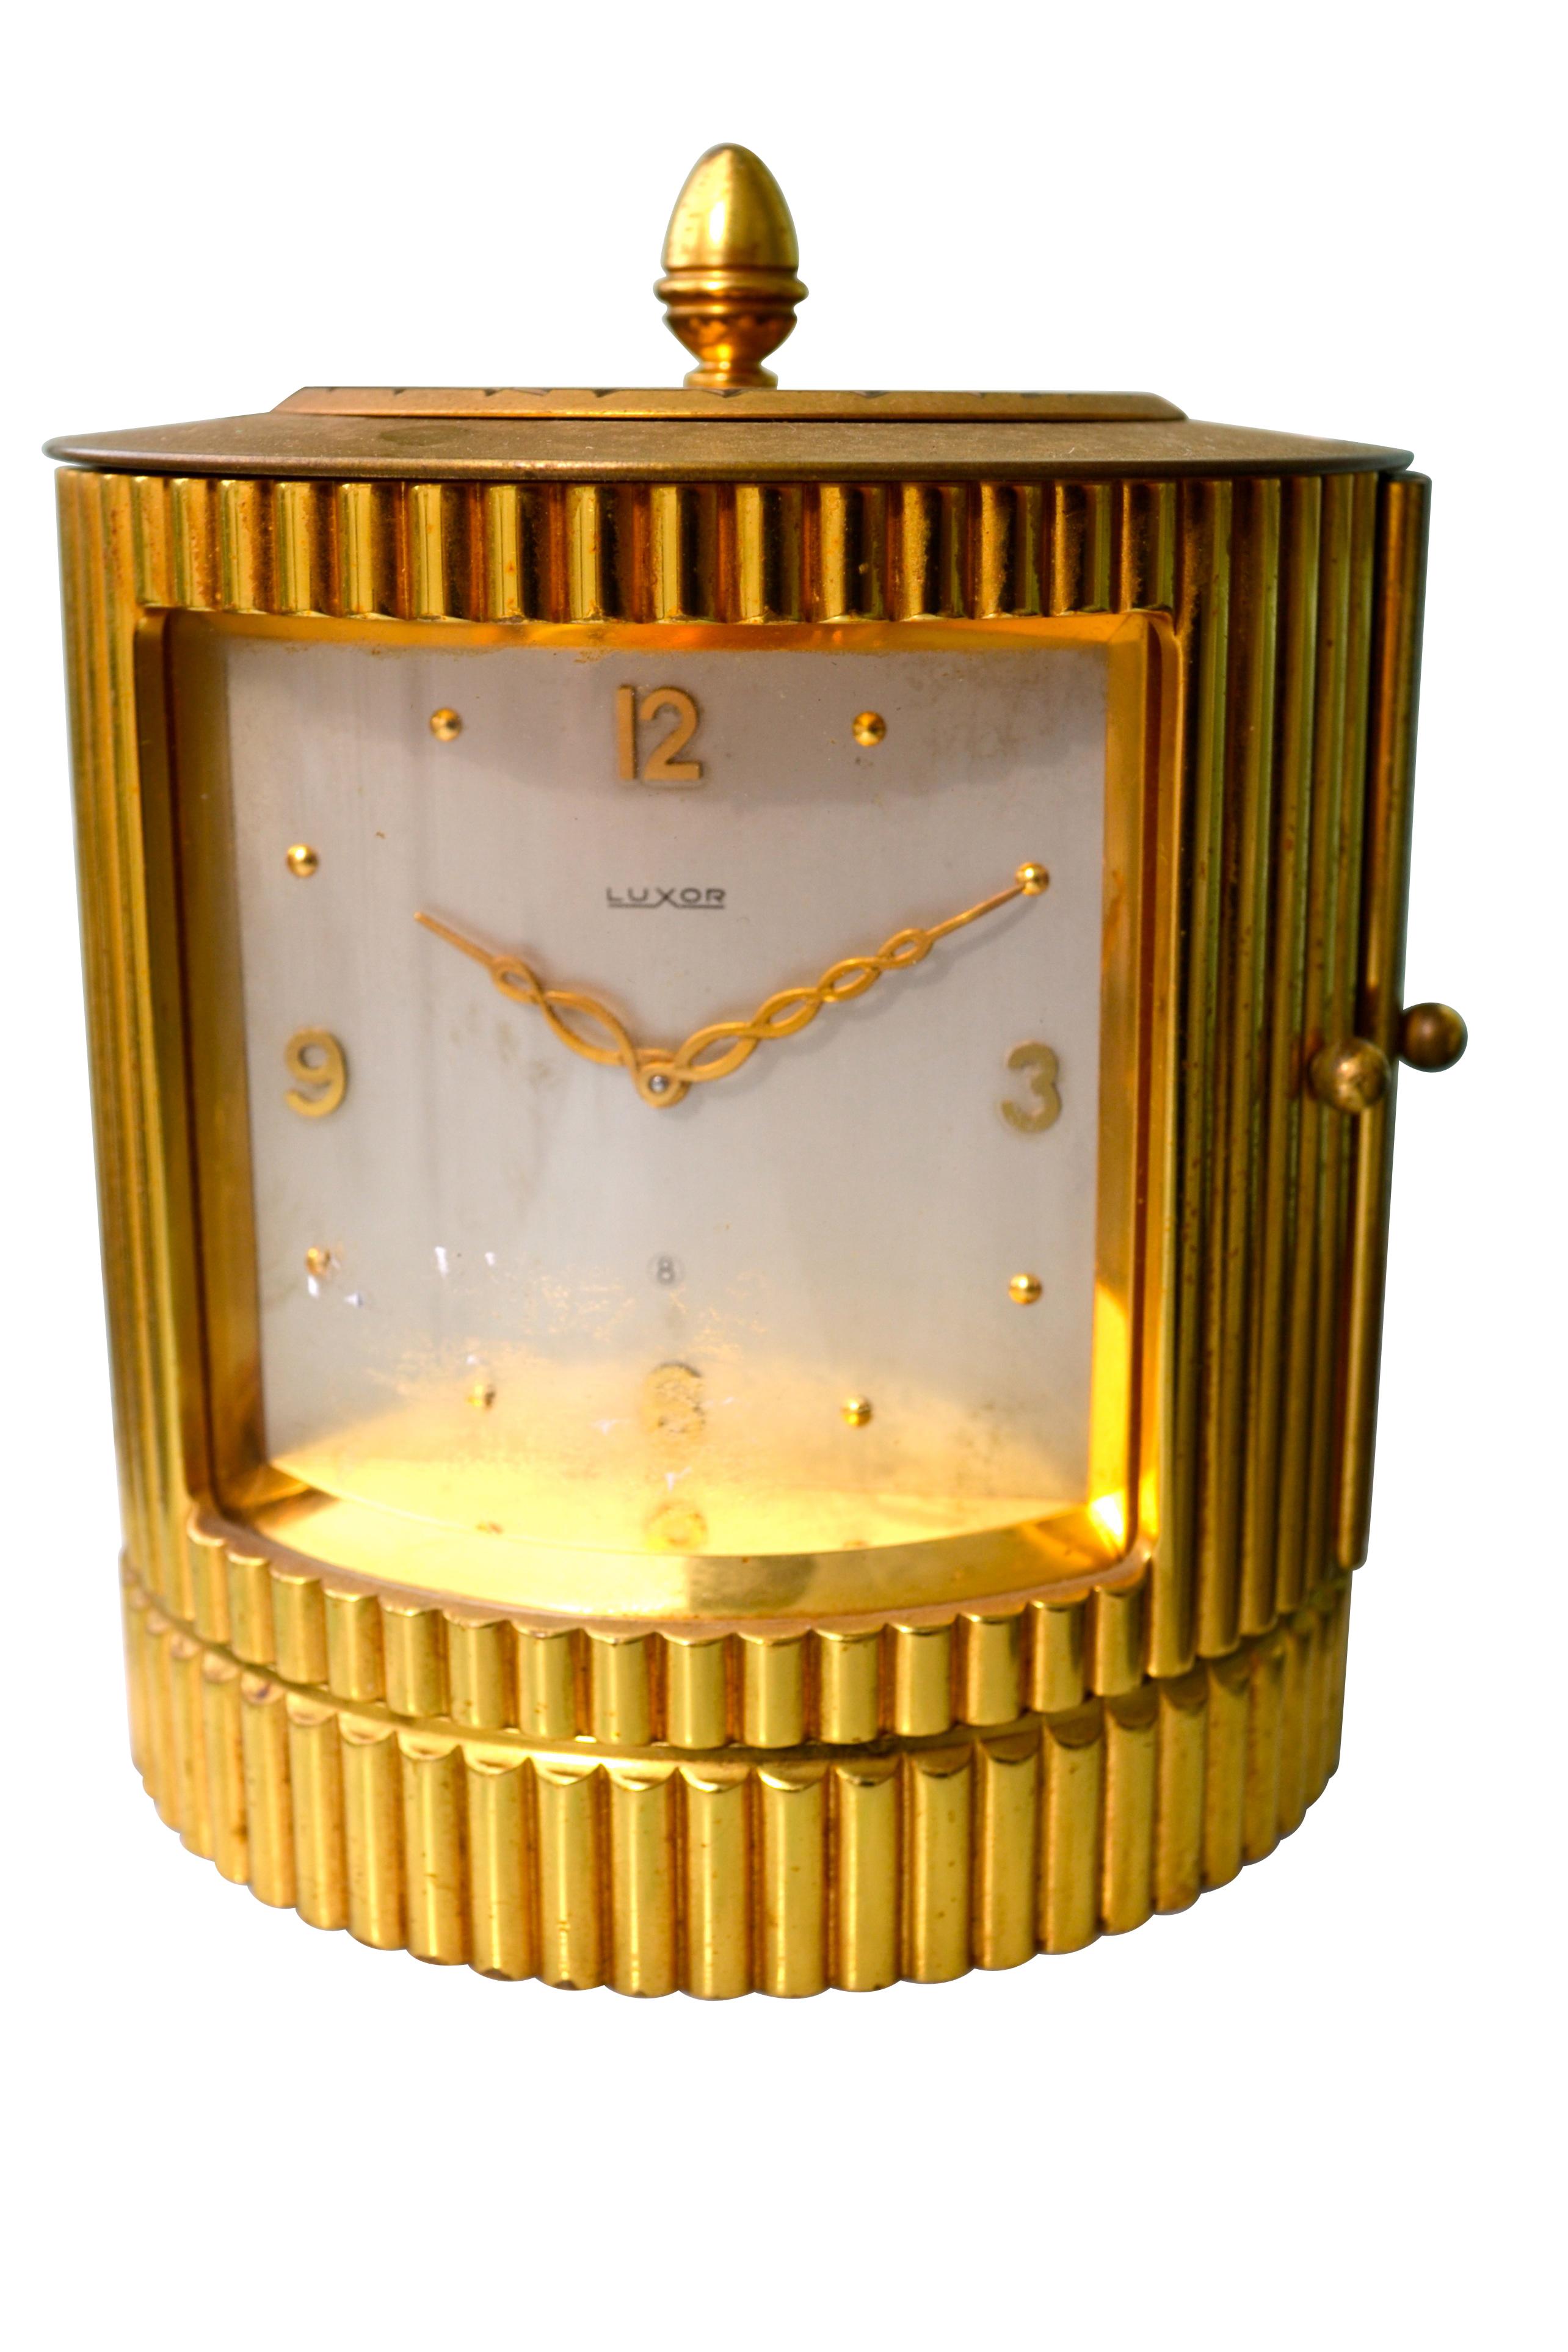 An unusual combination table clock and cigarette holder from the early 1950s made by a Swiss Company called Luxor that no longer is in business. The base also has a compartment originally for holding cigarettes or it could be used as a holder for